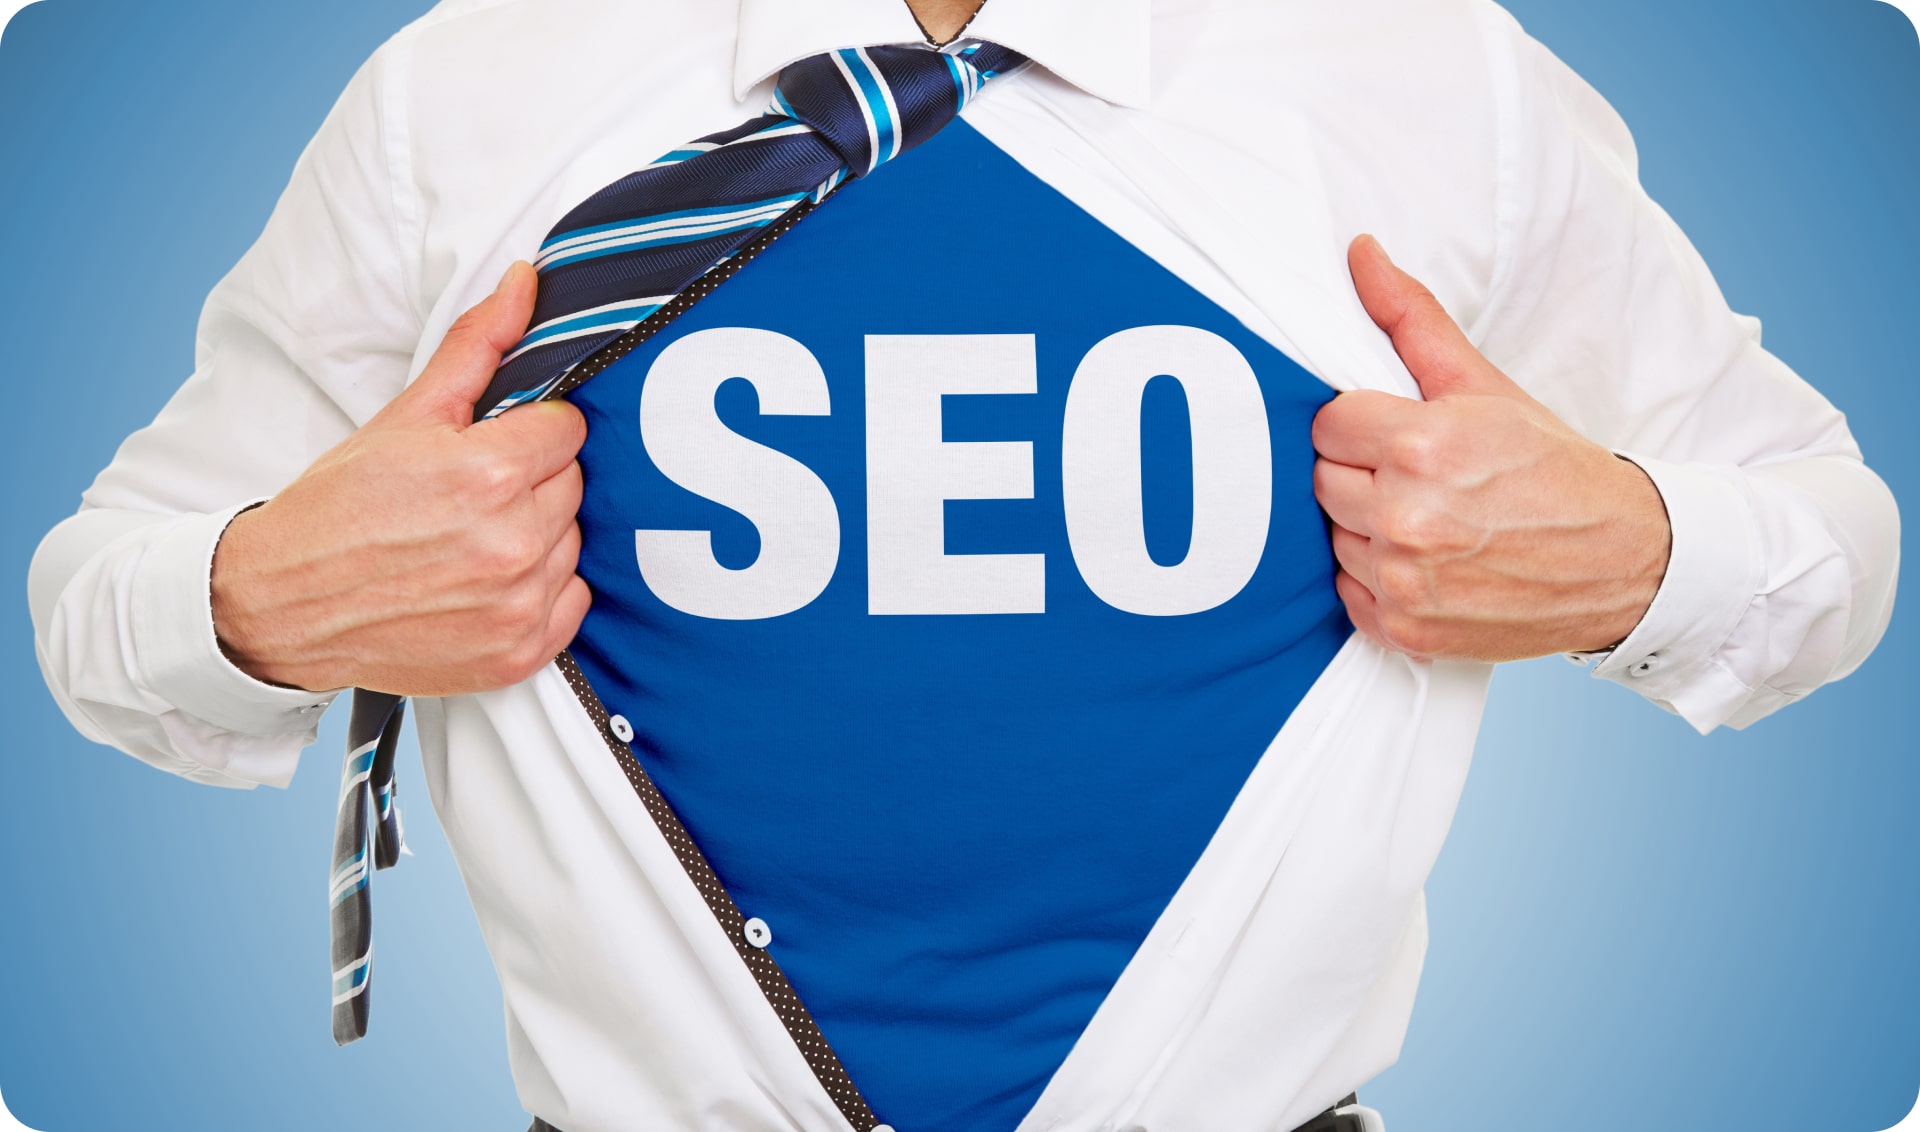 The image of a person with an unbuttoned shirt, on which is written seo